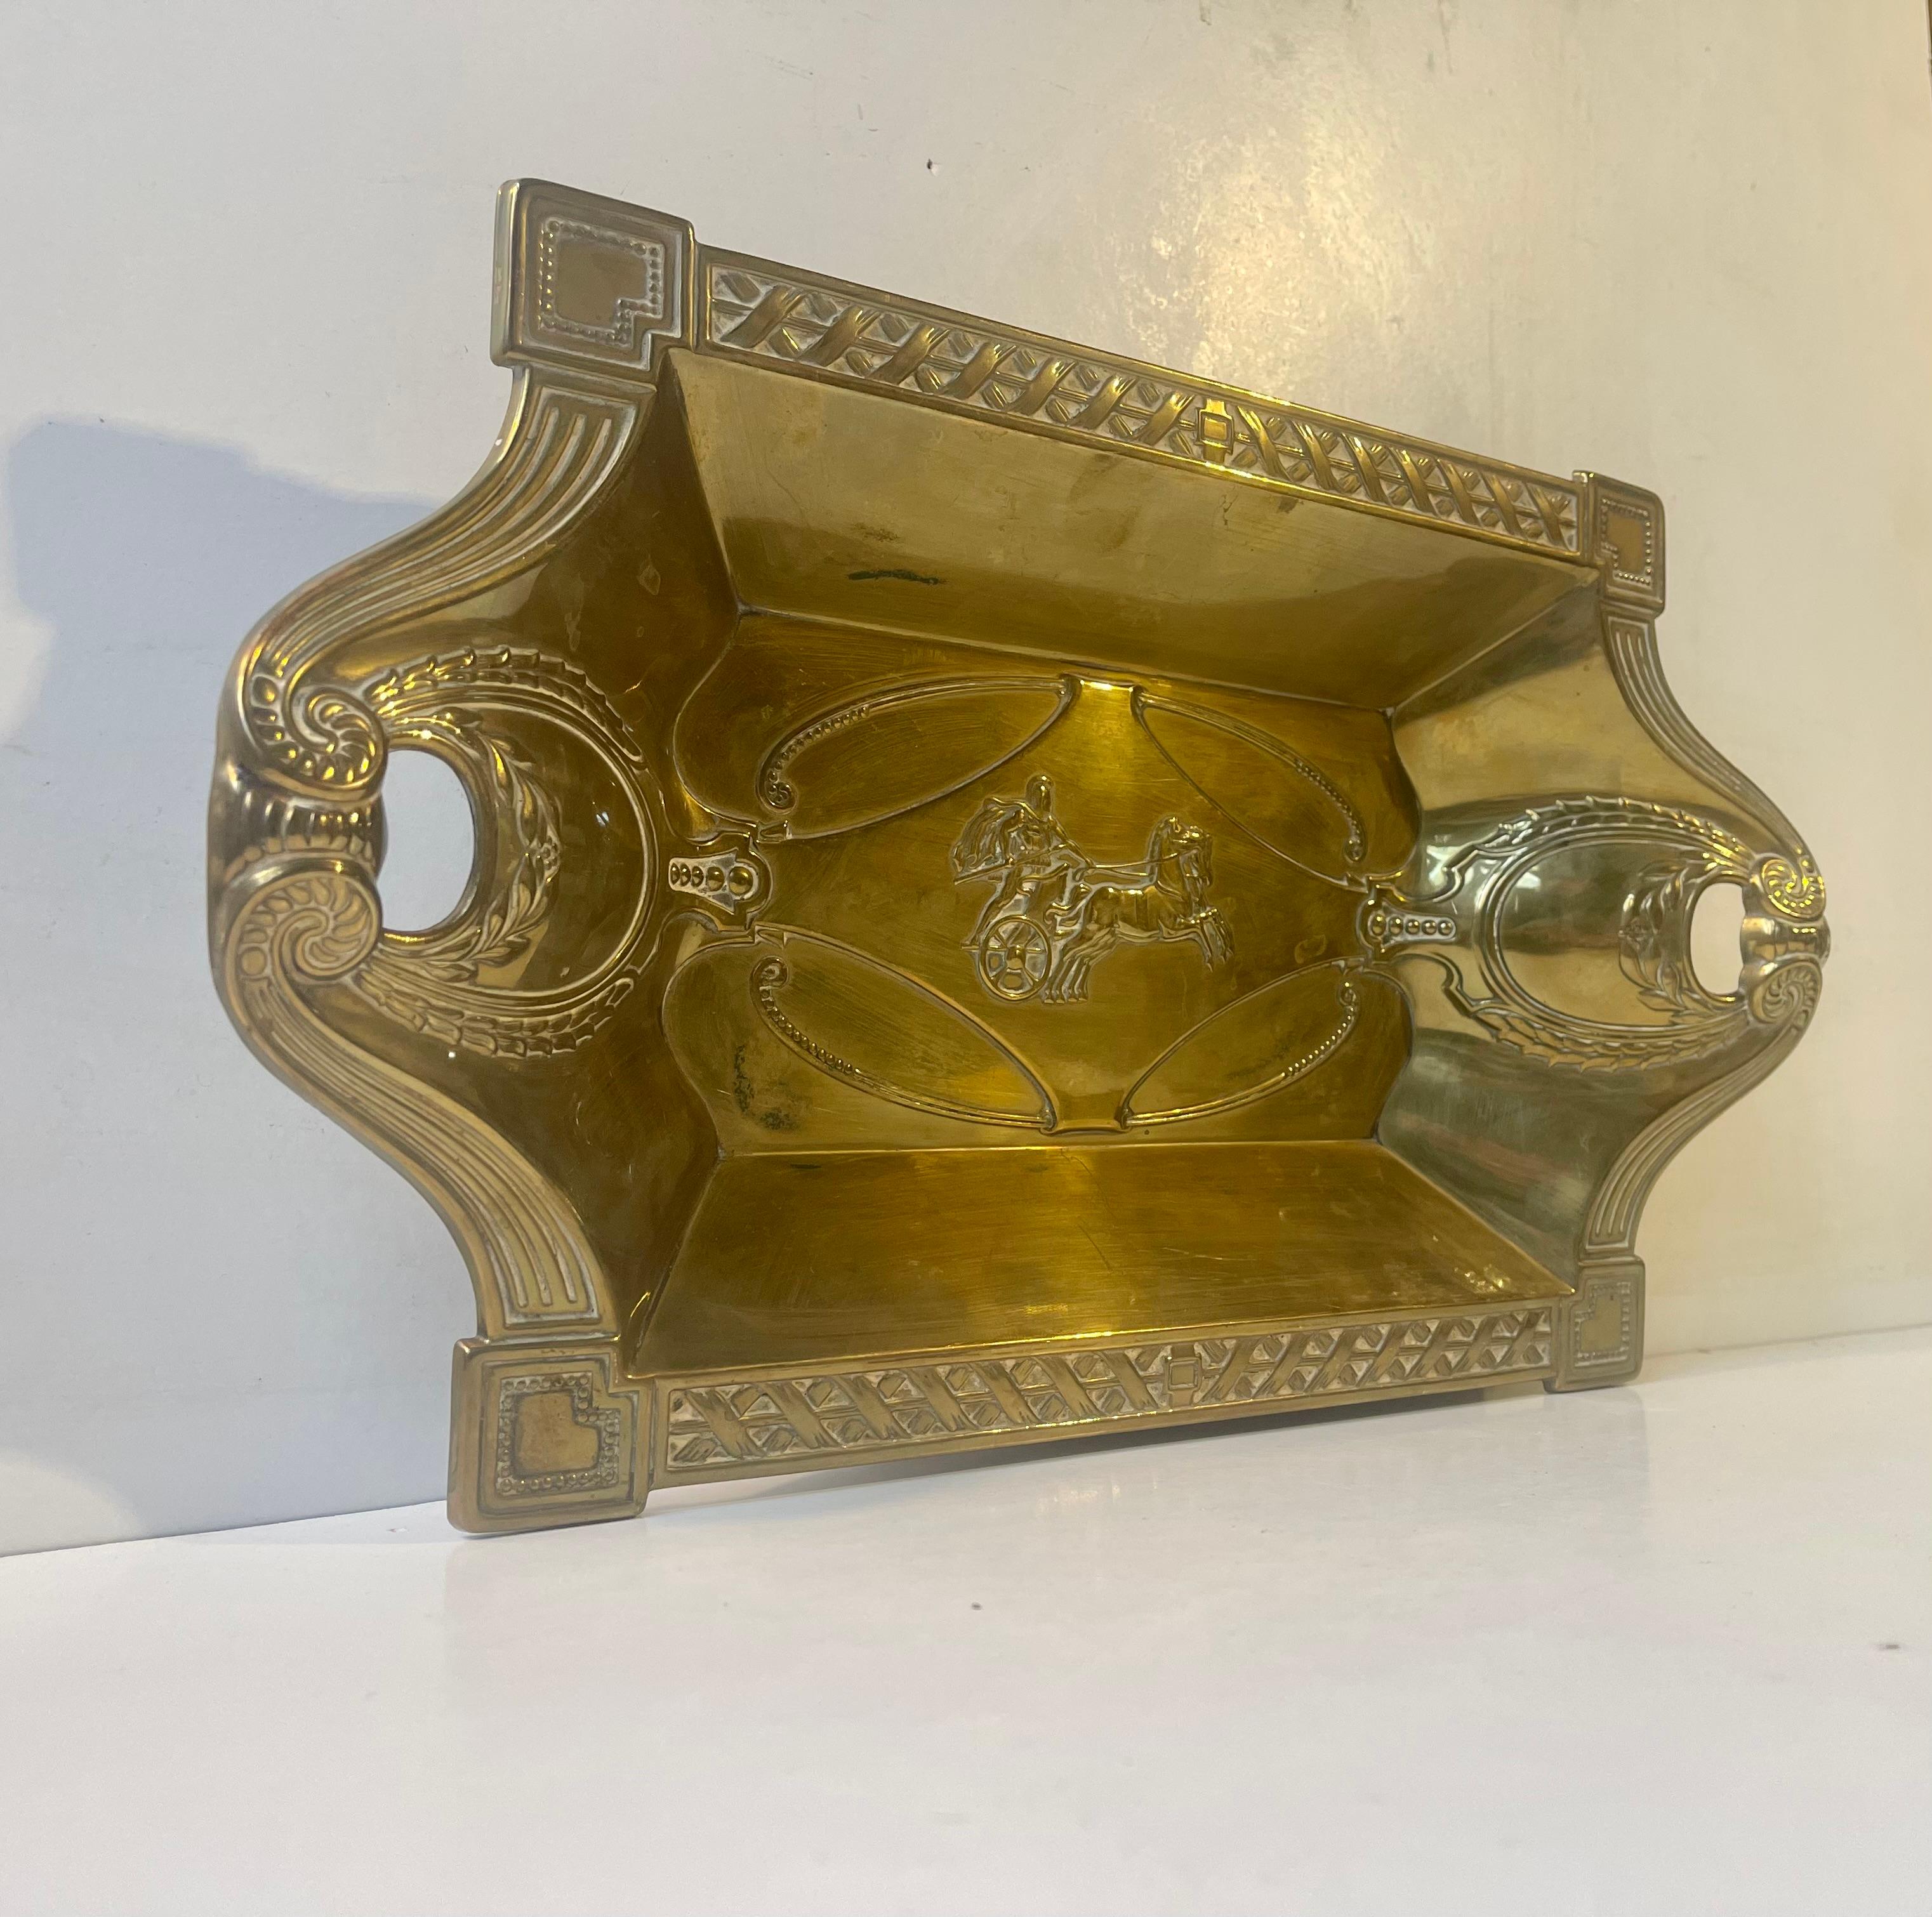 Embossed Basket in Brass suitable for bread, fruits or vanity purposes. Distinct art nouveau styling and a center motif or a riding gladiator. Made in France circa 1900-1920. Measurements: 35x21x5 cm.